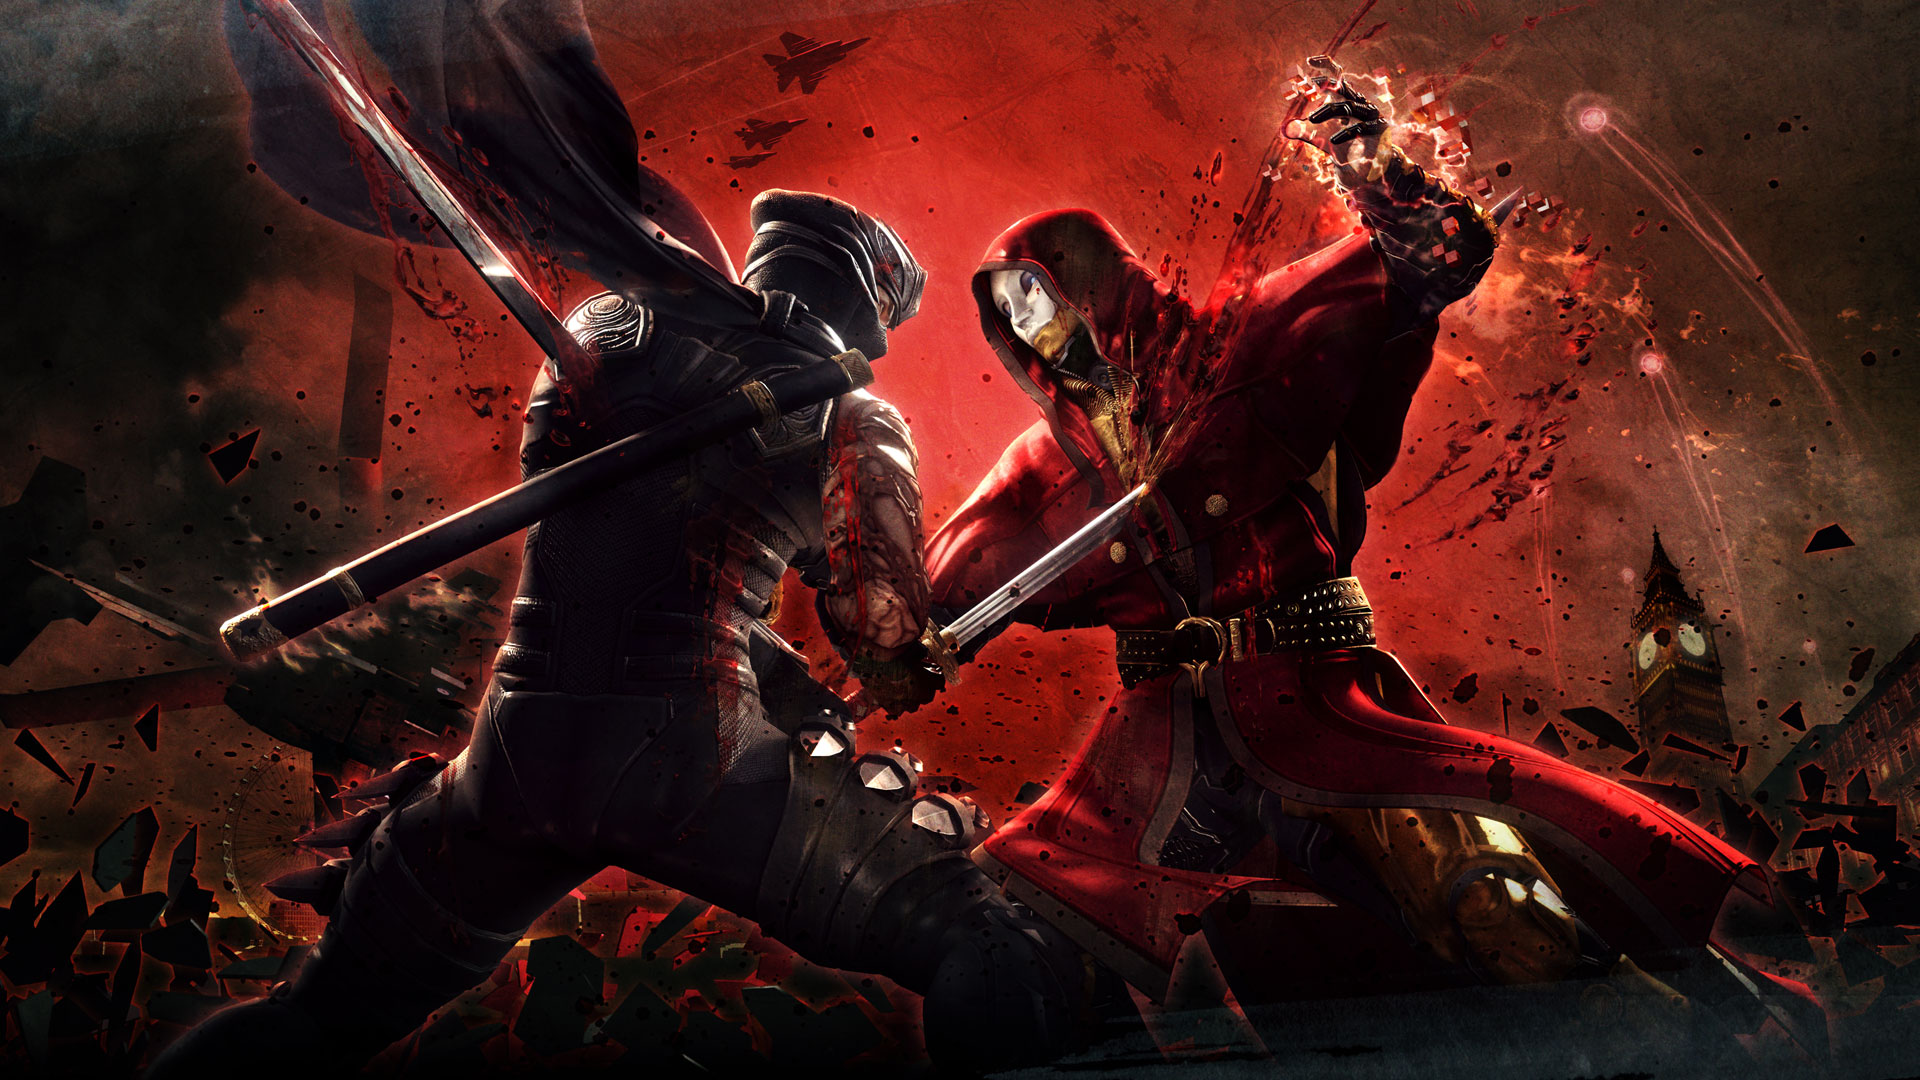 Download Full HD Wallpapers absolutely free for your pc desktop, laptop and mobile devices. Ninja Gaiden 3 Wallpaper